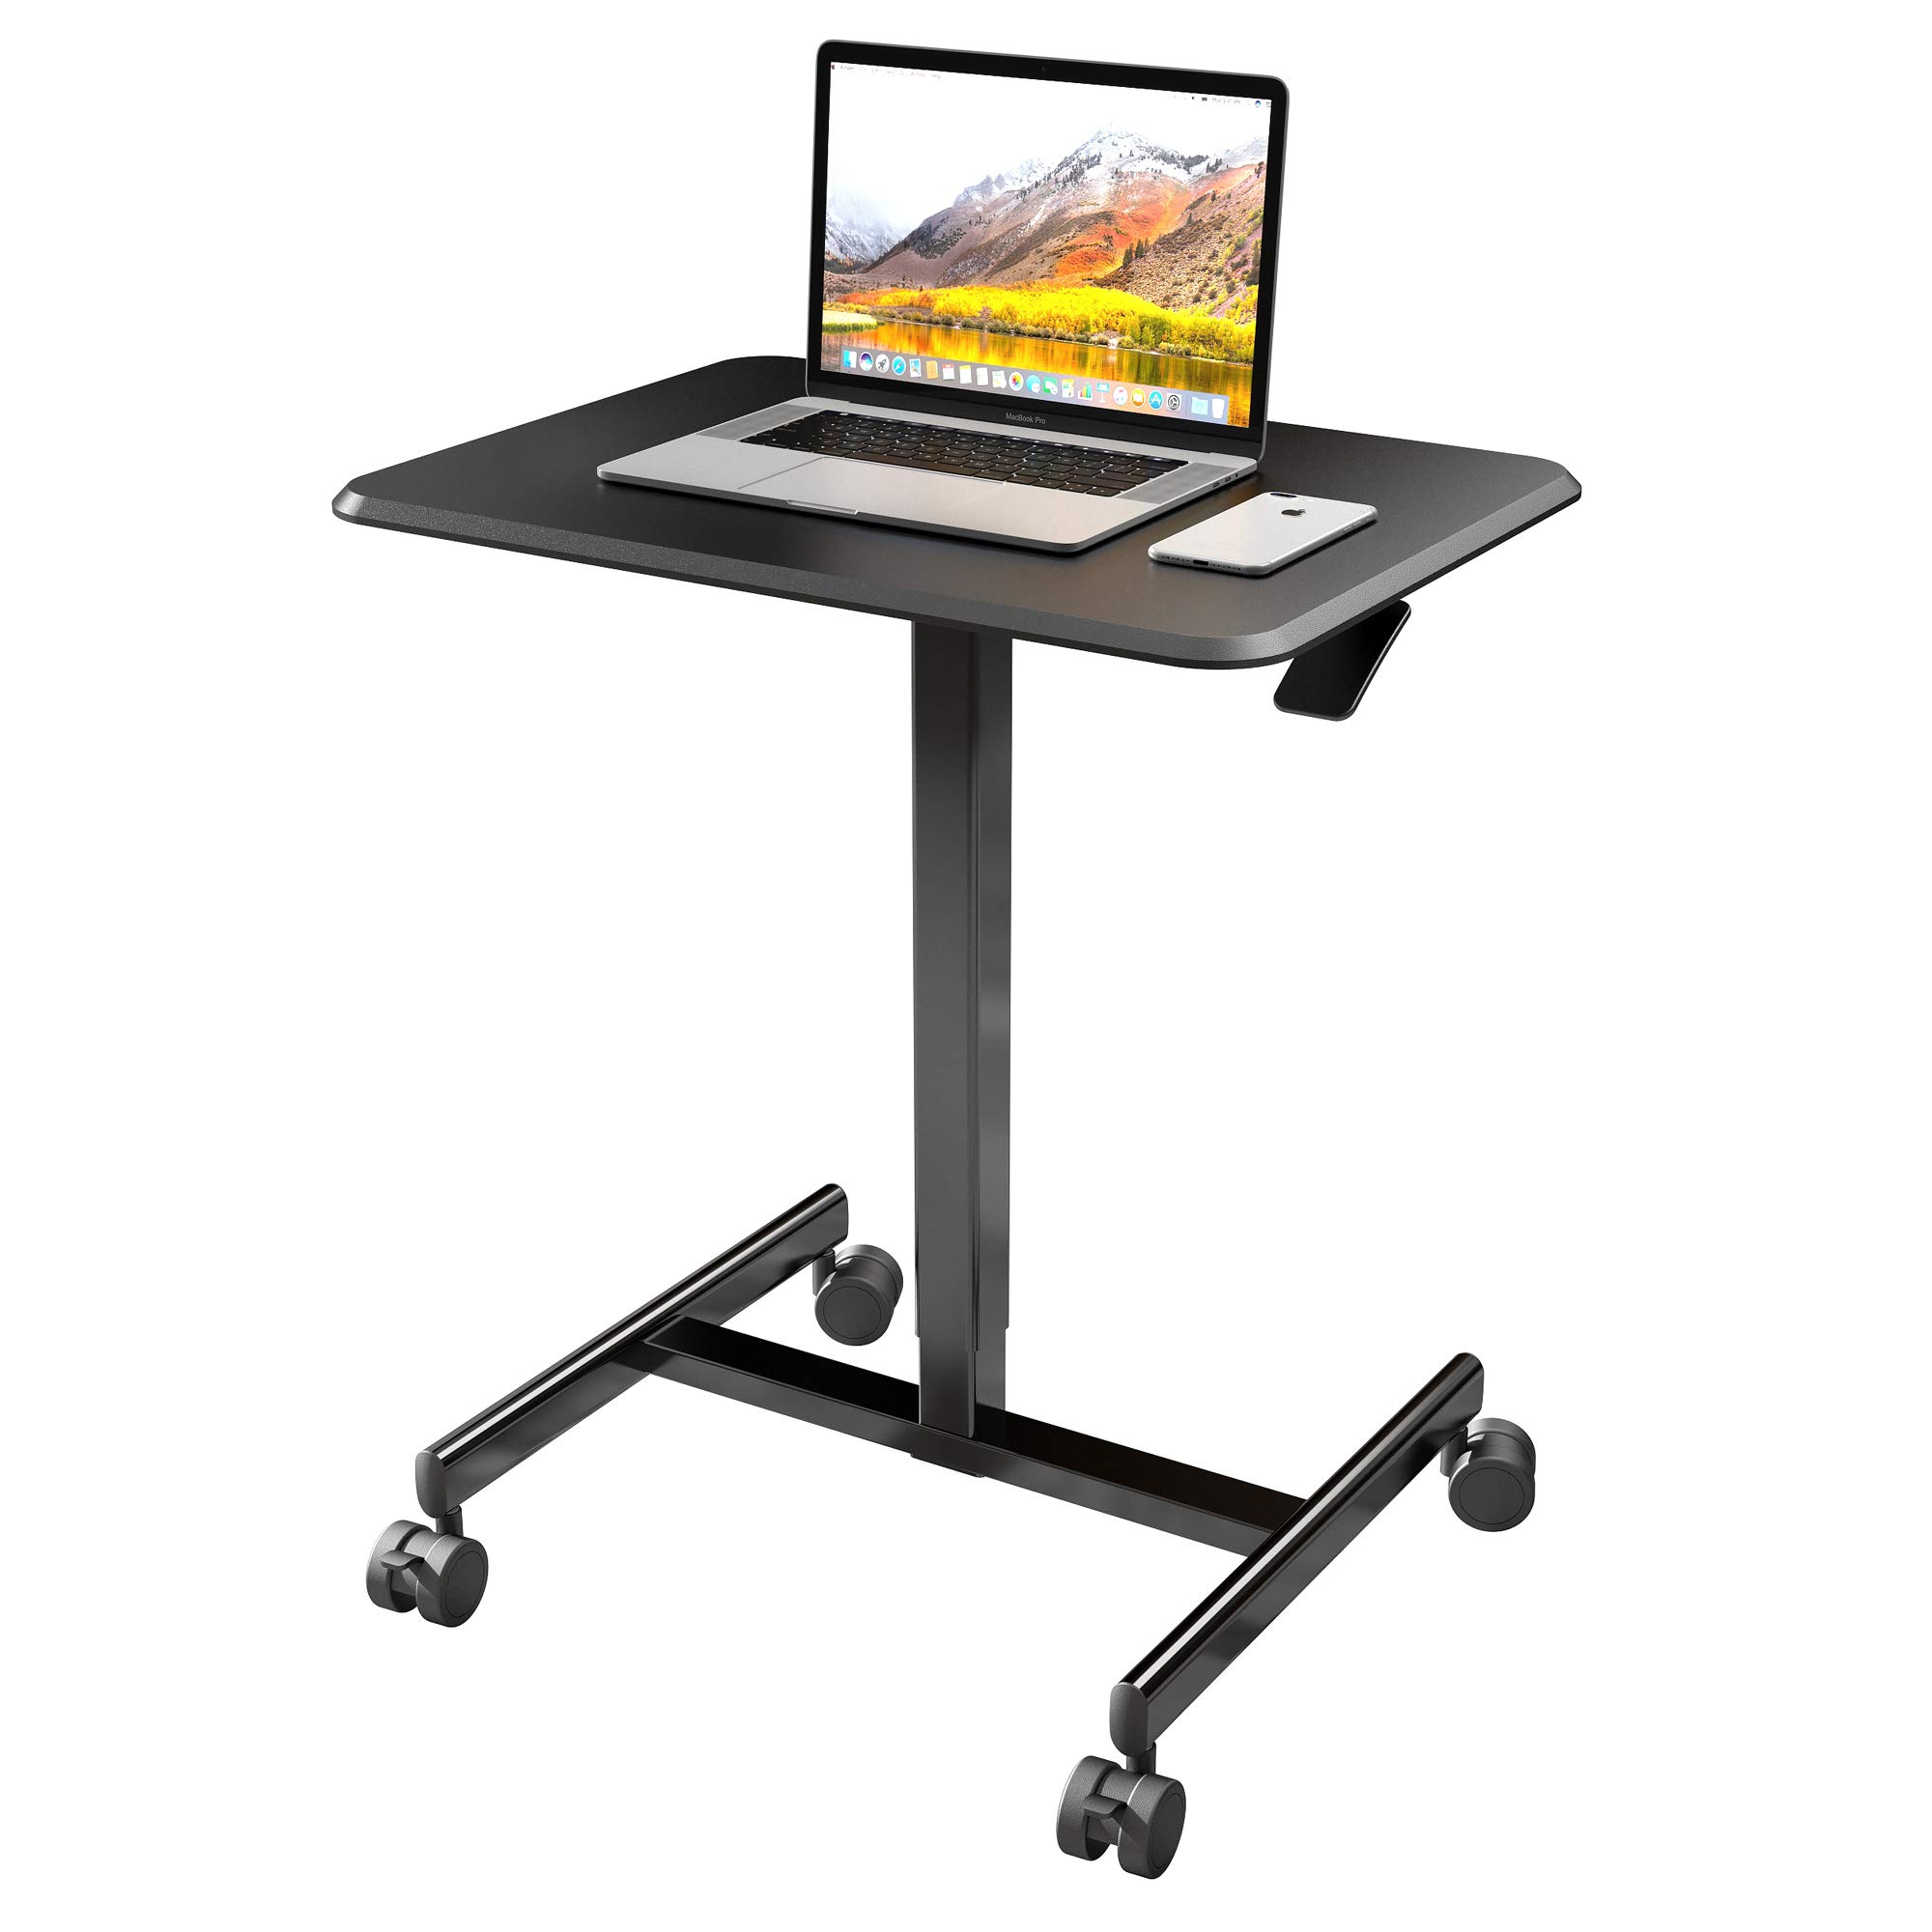 ONTRY Mobile Desk Computer Desk with Lockable Wheels,25.6"x18.9" Height Adjustable Laptop Cart, Easy-Care